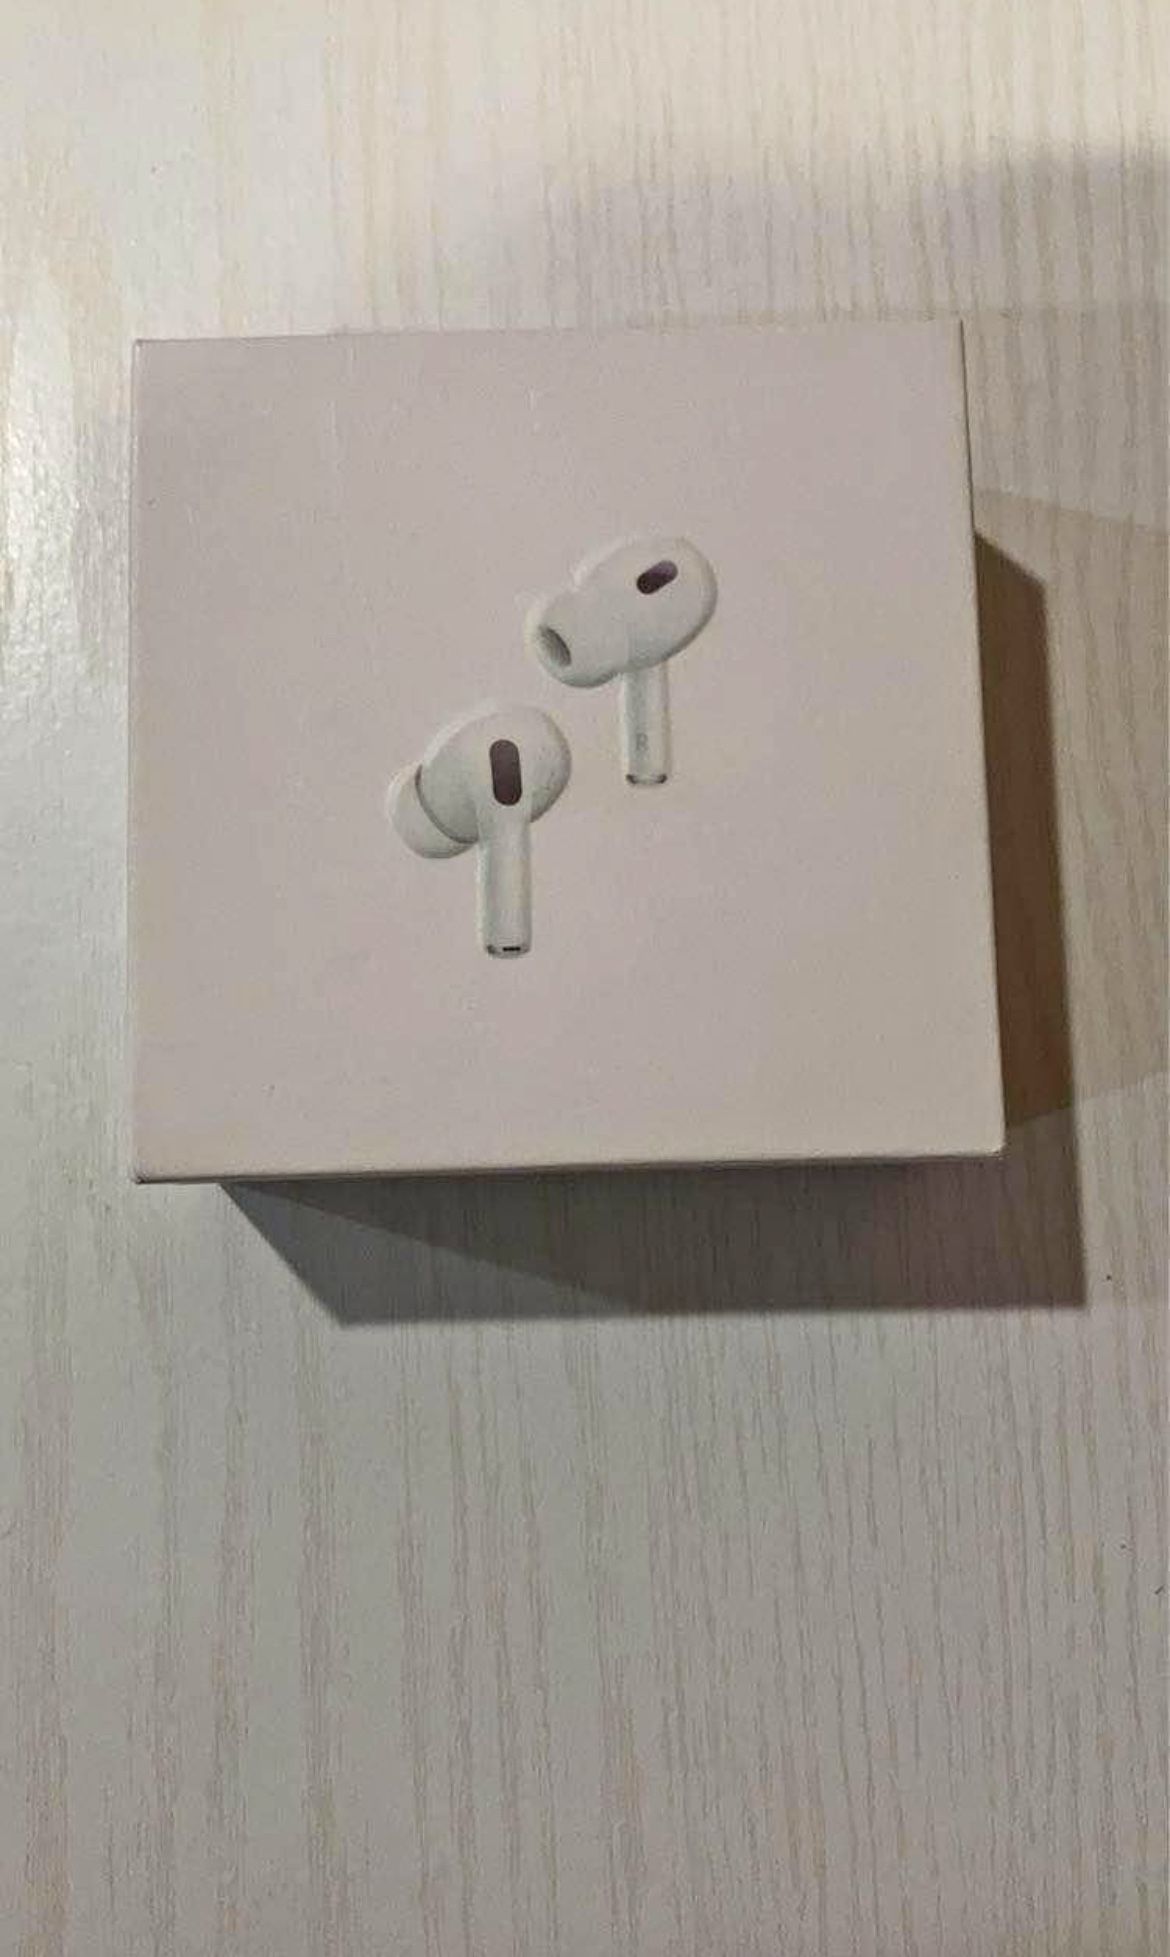 Airpods pro (Unopened)